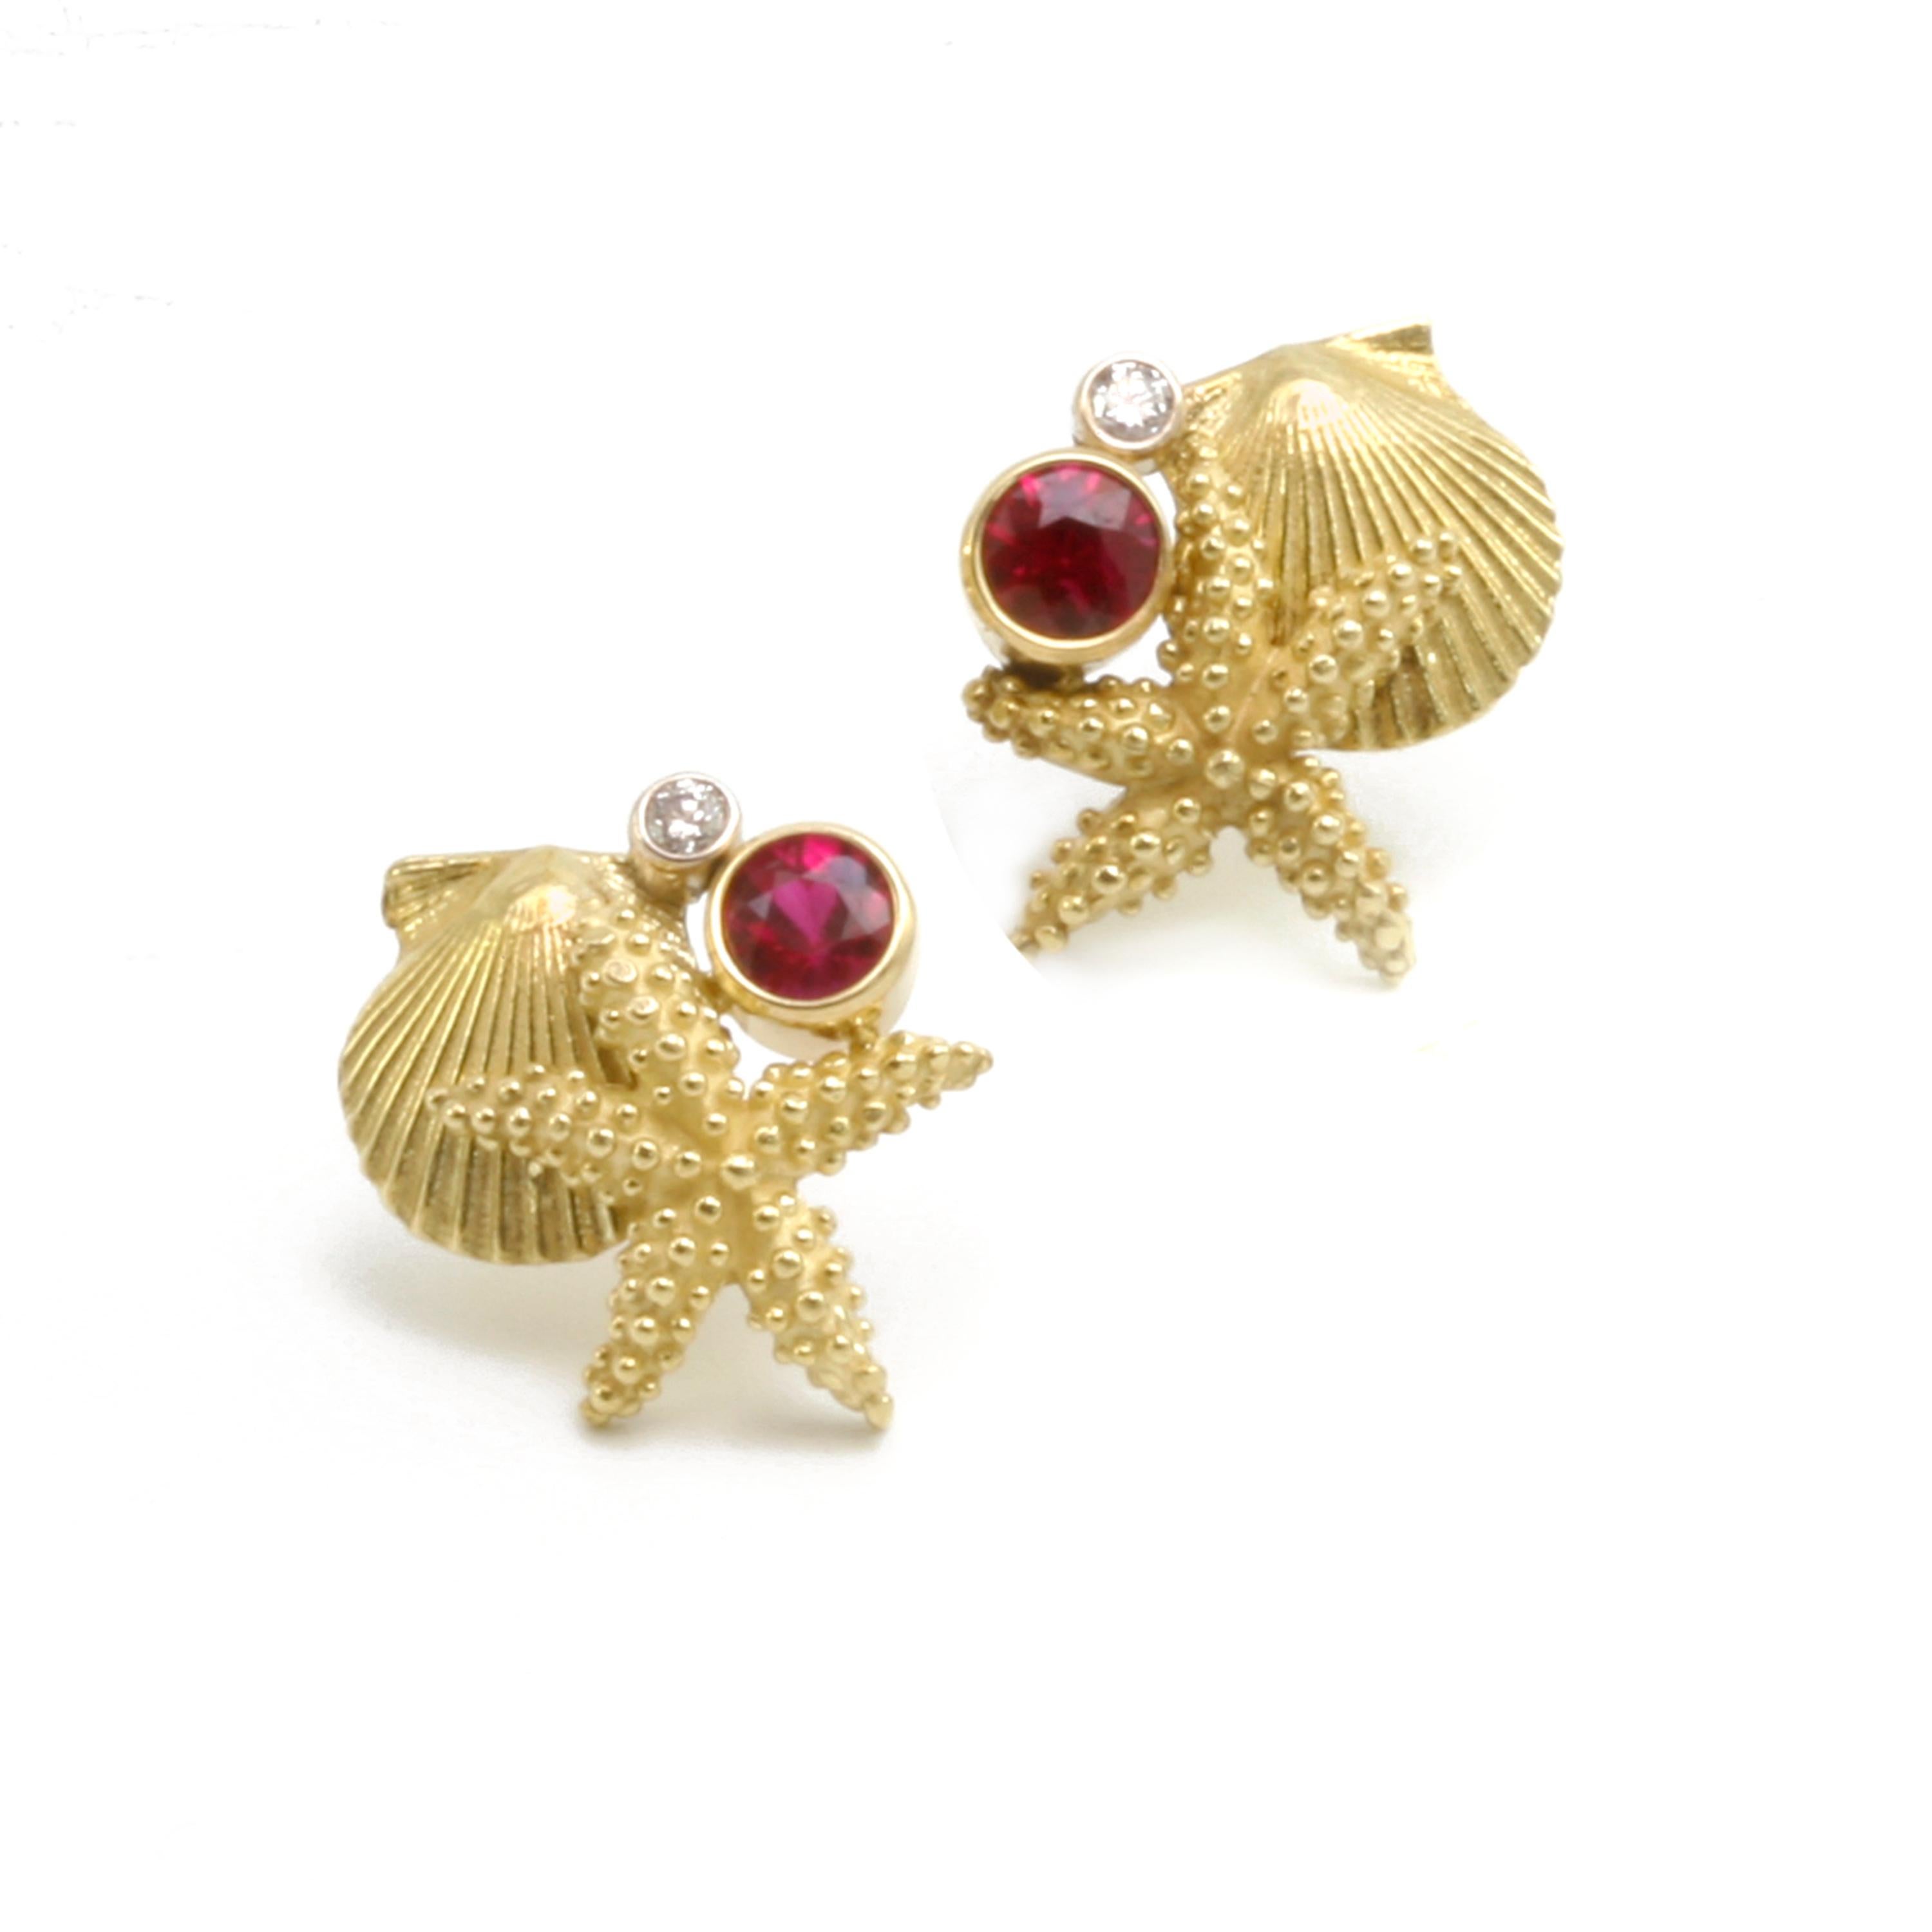 Diana Kim England Starfish, Scallop, Ruby, and Diamond Earrings in 18k In New Condition For Sale In Red Hook, NY